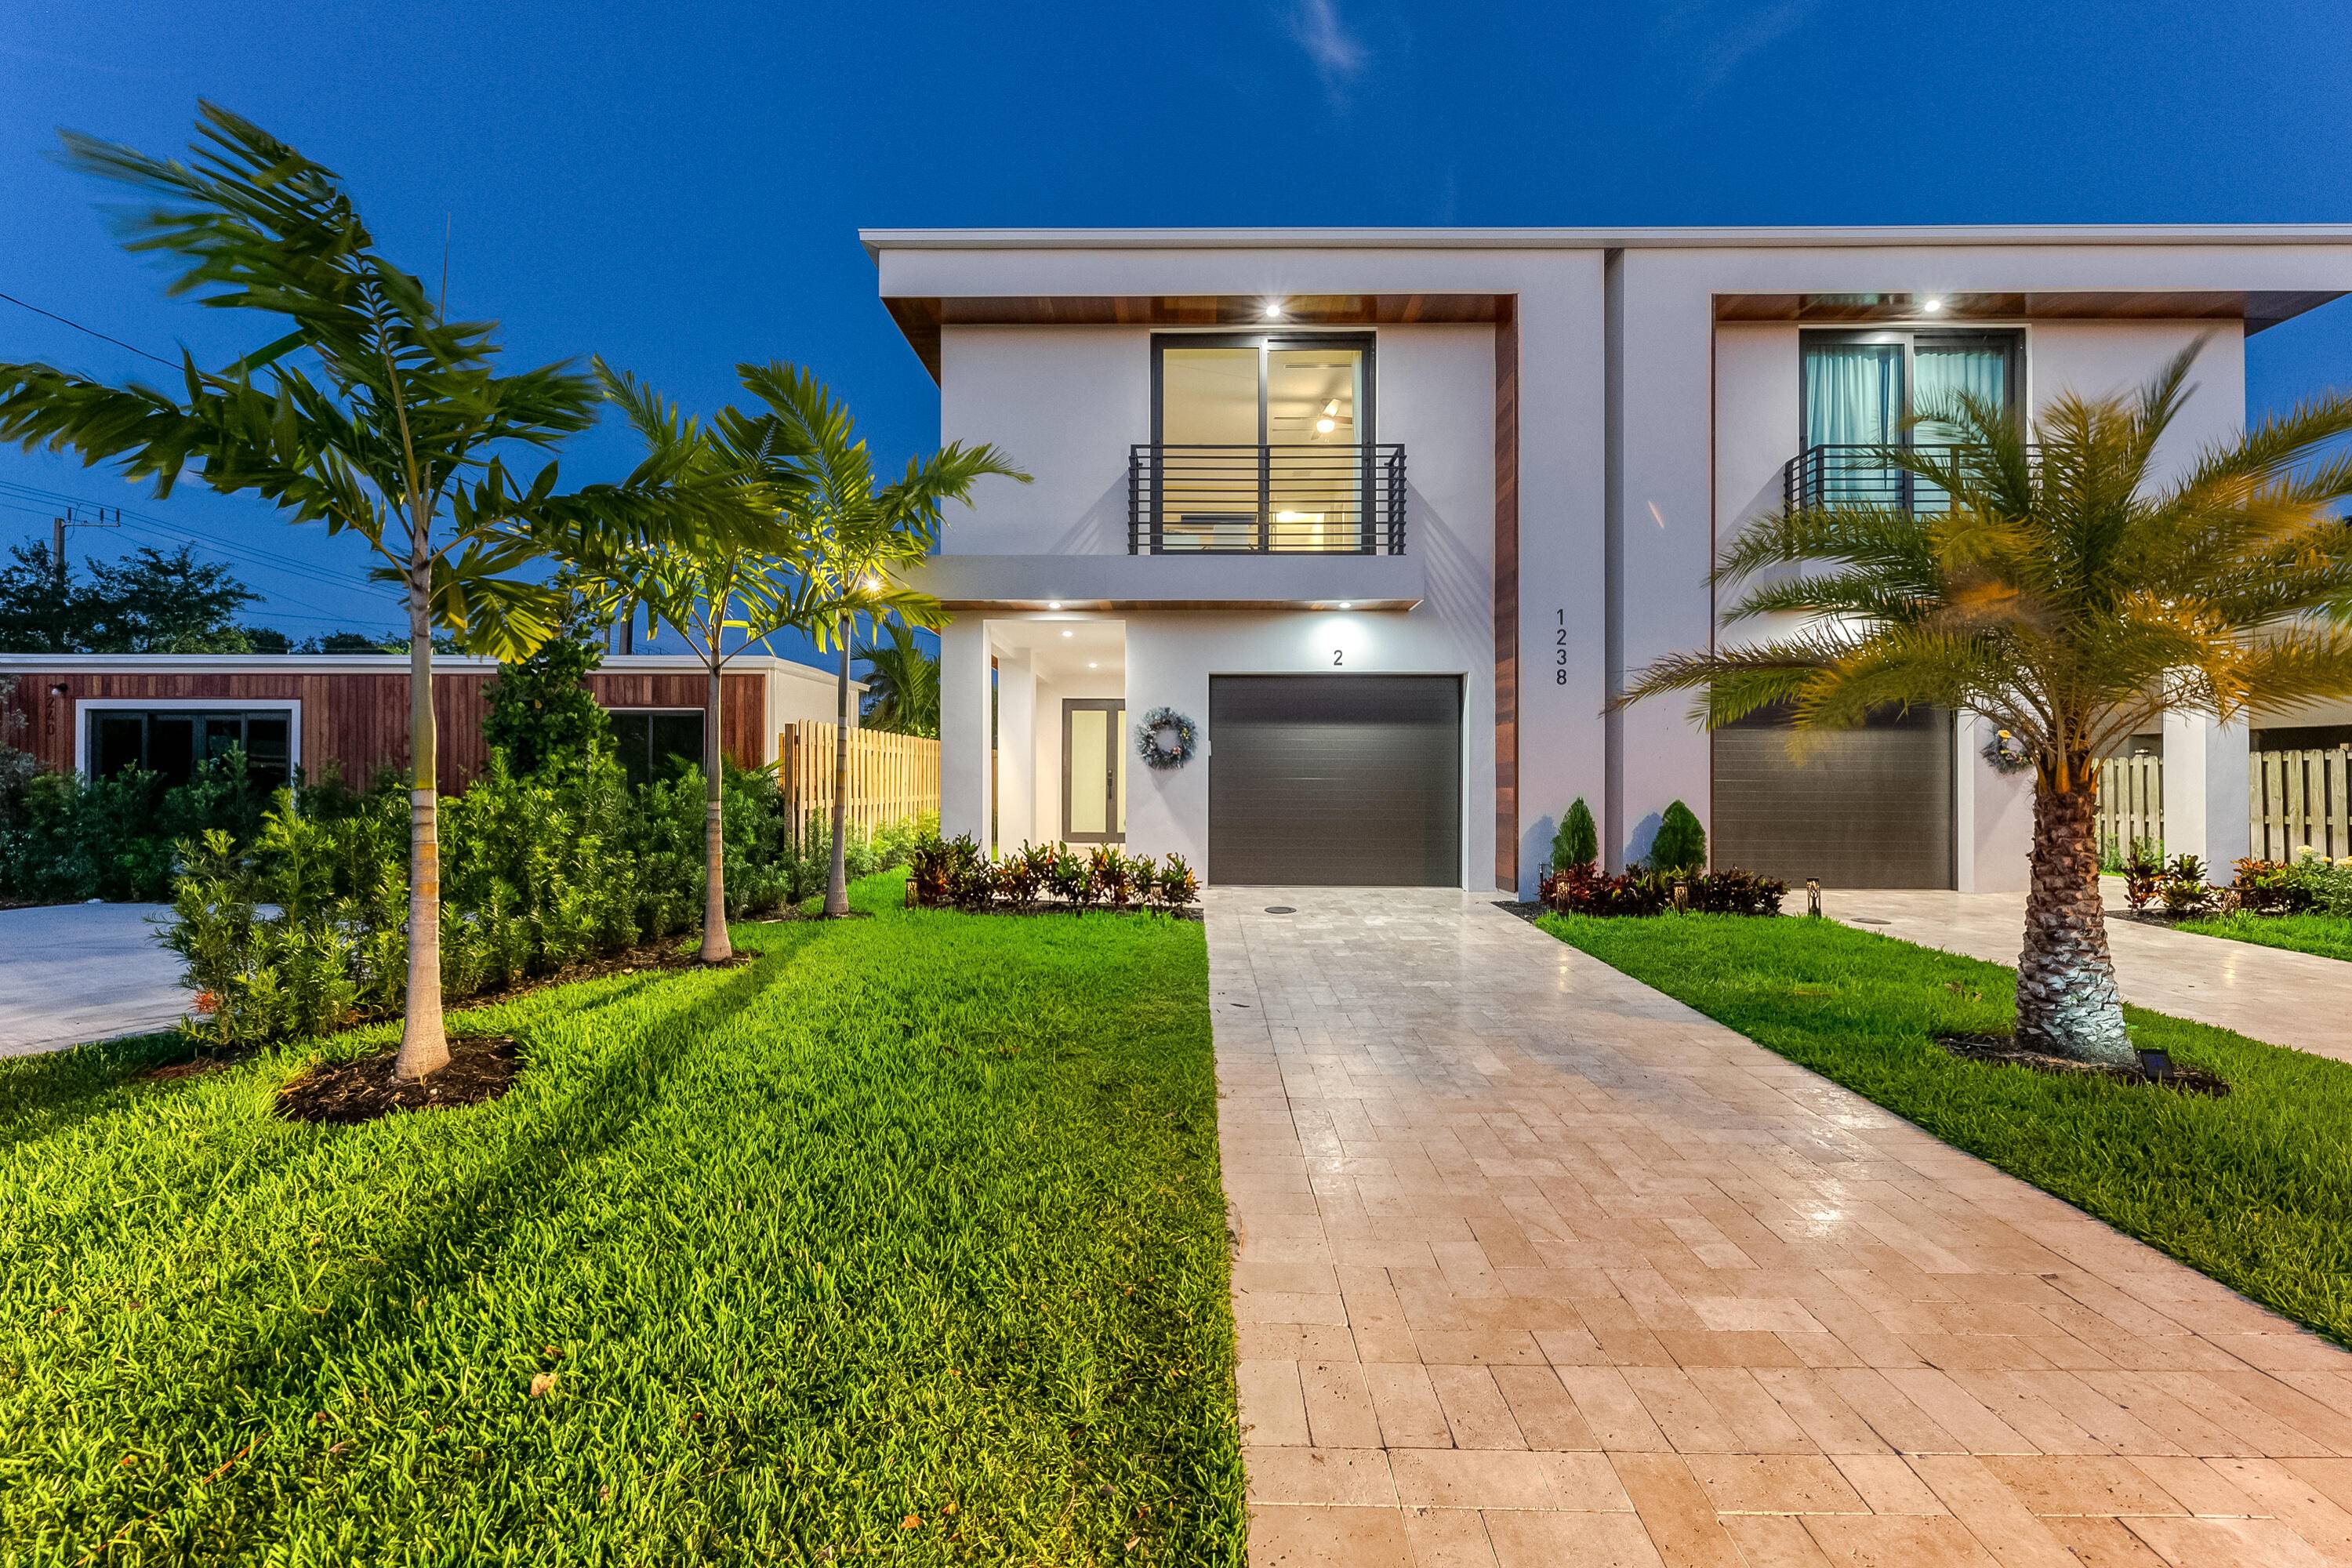 Modern new construction home just minutes from Las Olas Blvd, Galleria shopping mall and the Beach.